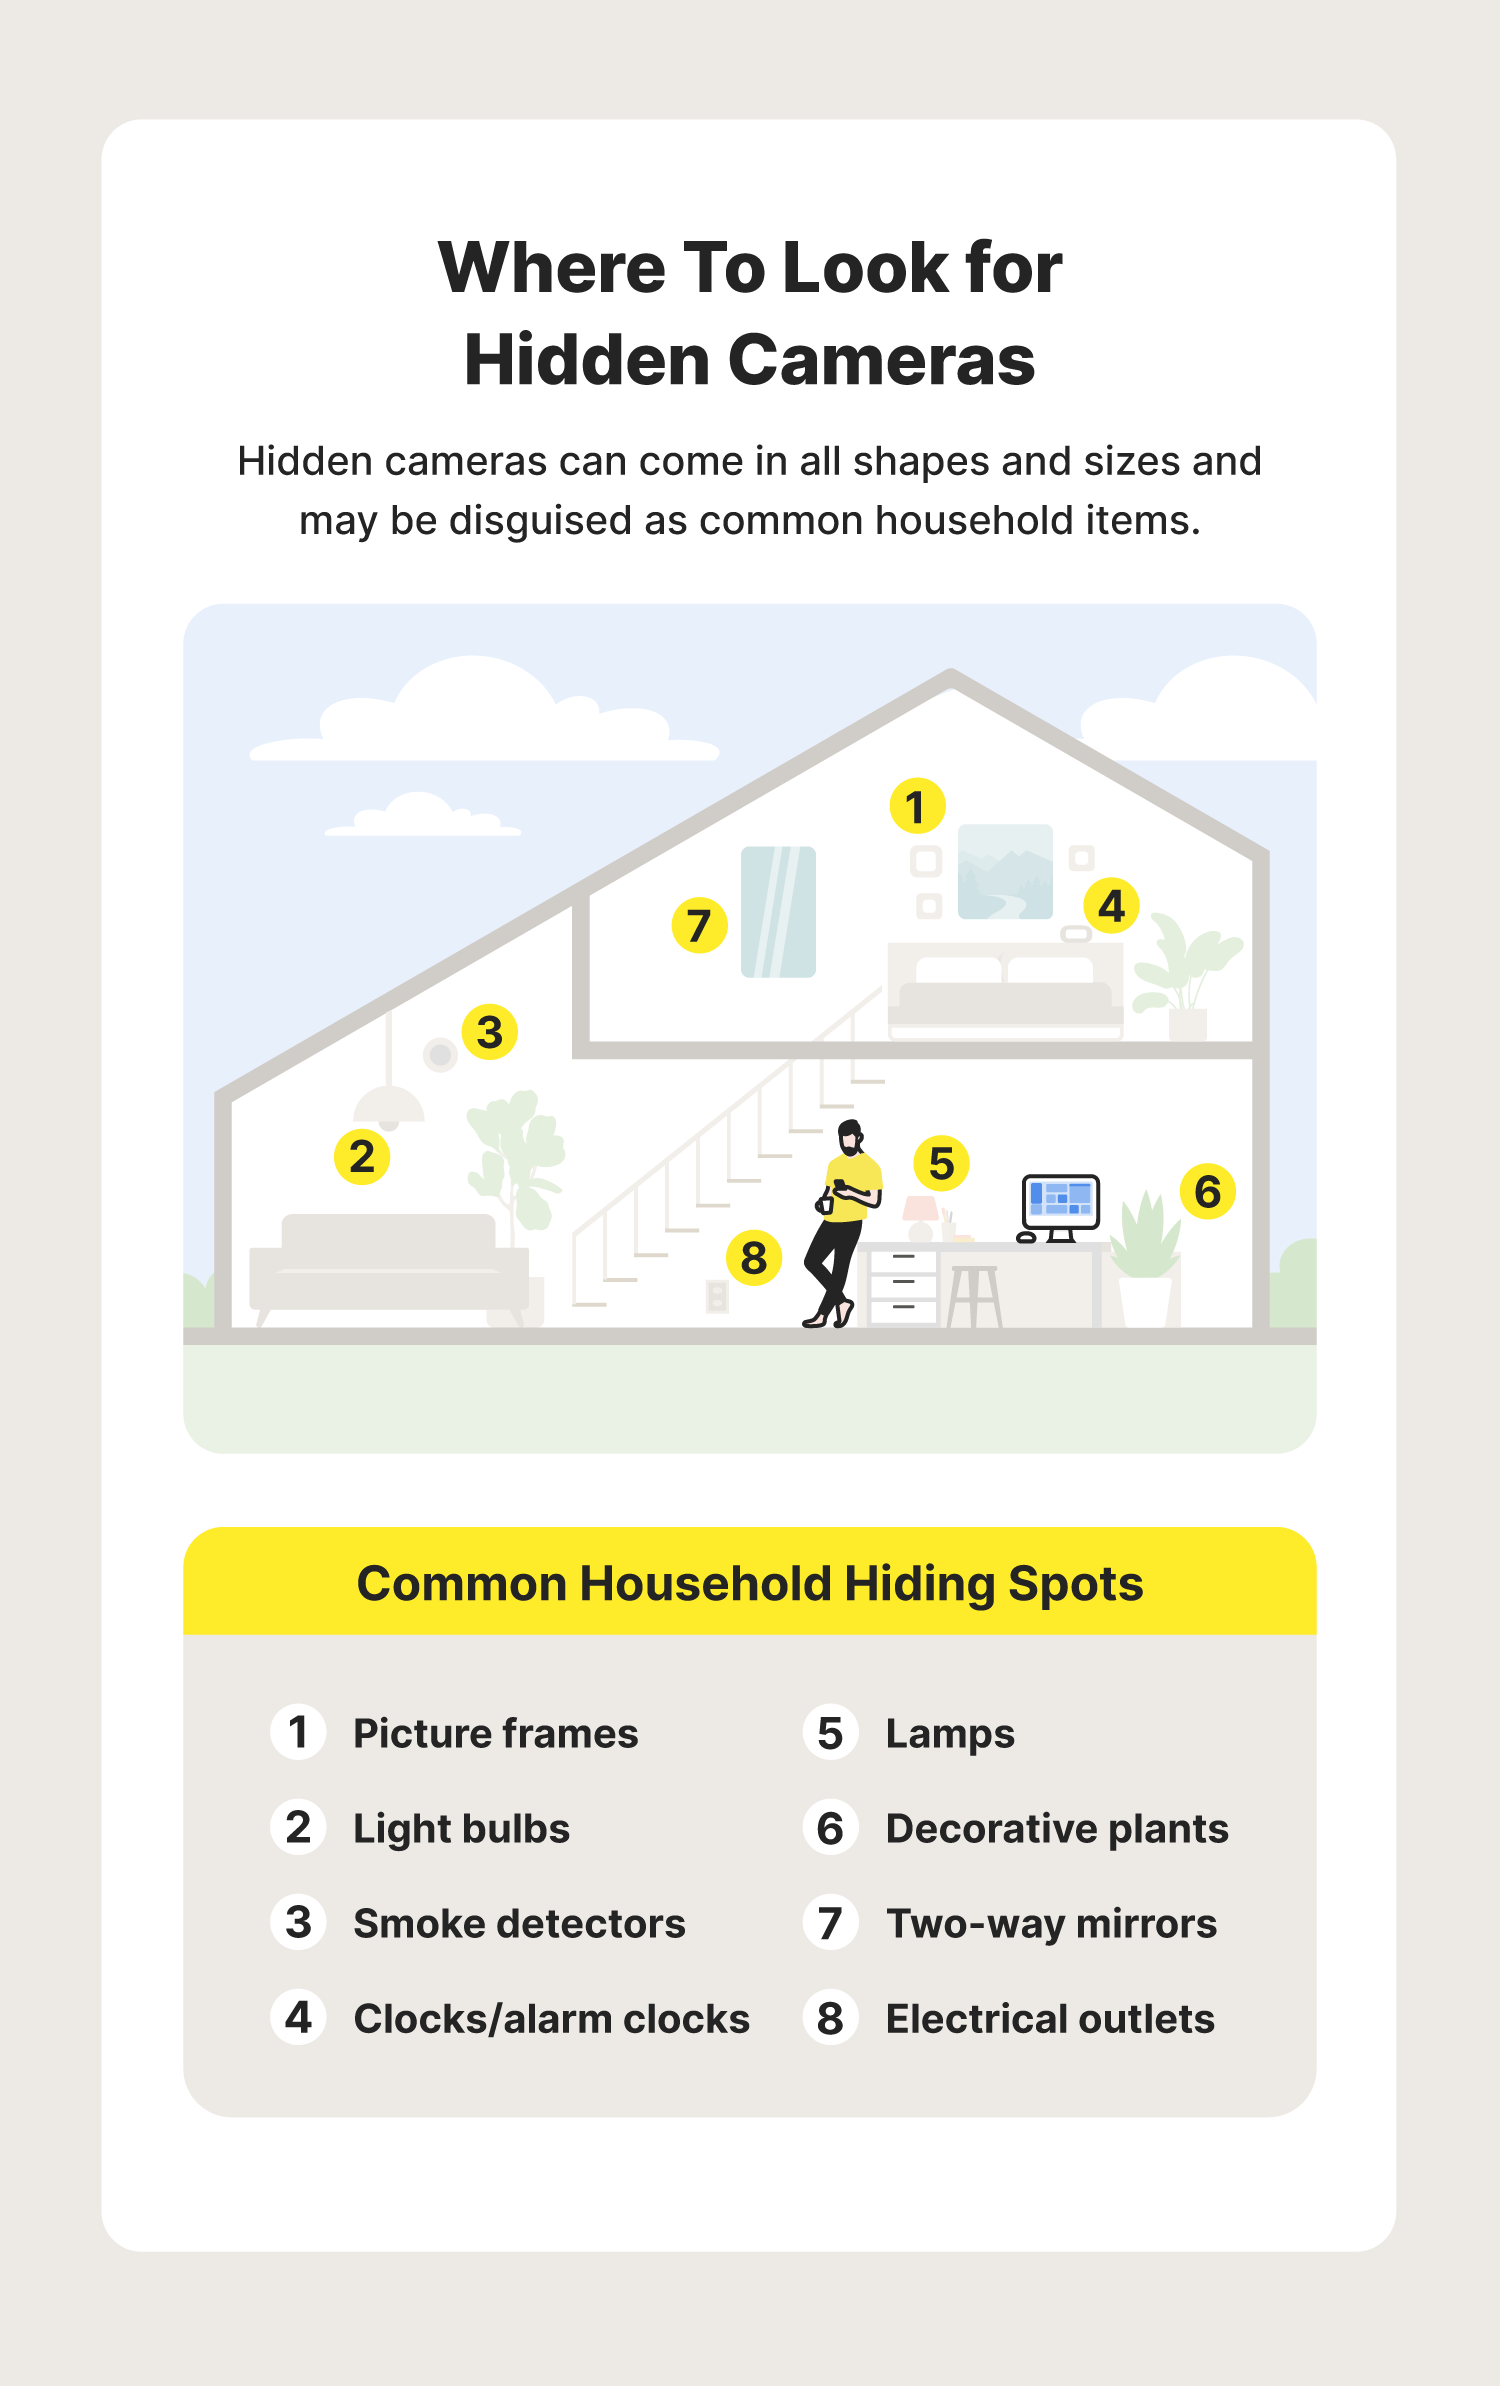 A graphic lists common household camera hiding spots, further explaining how to find hidden cameras.